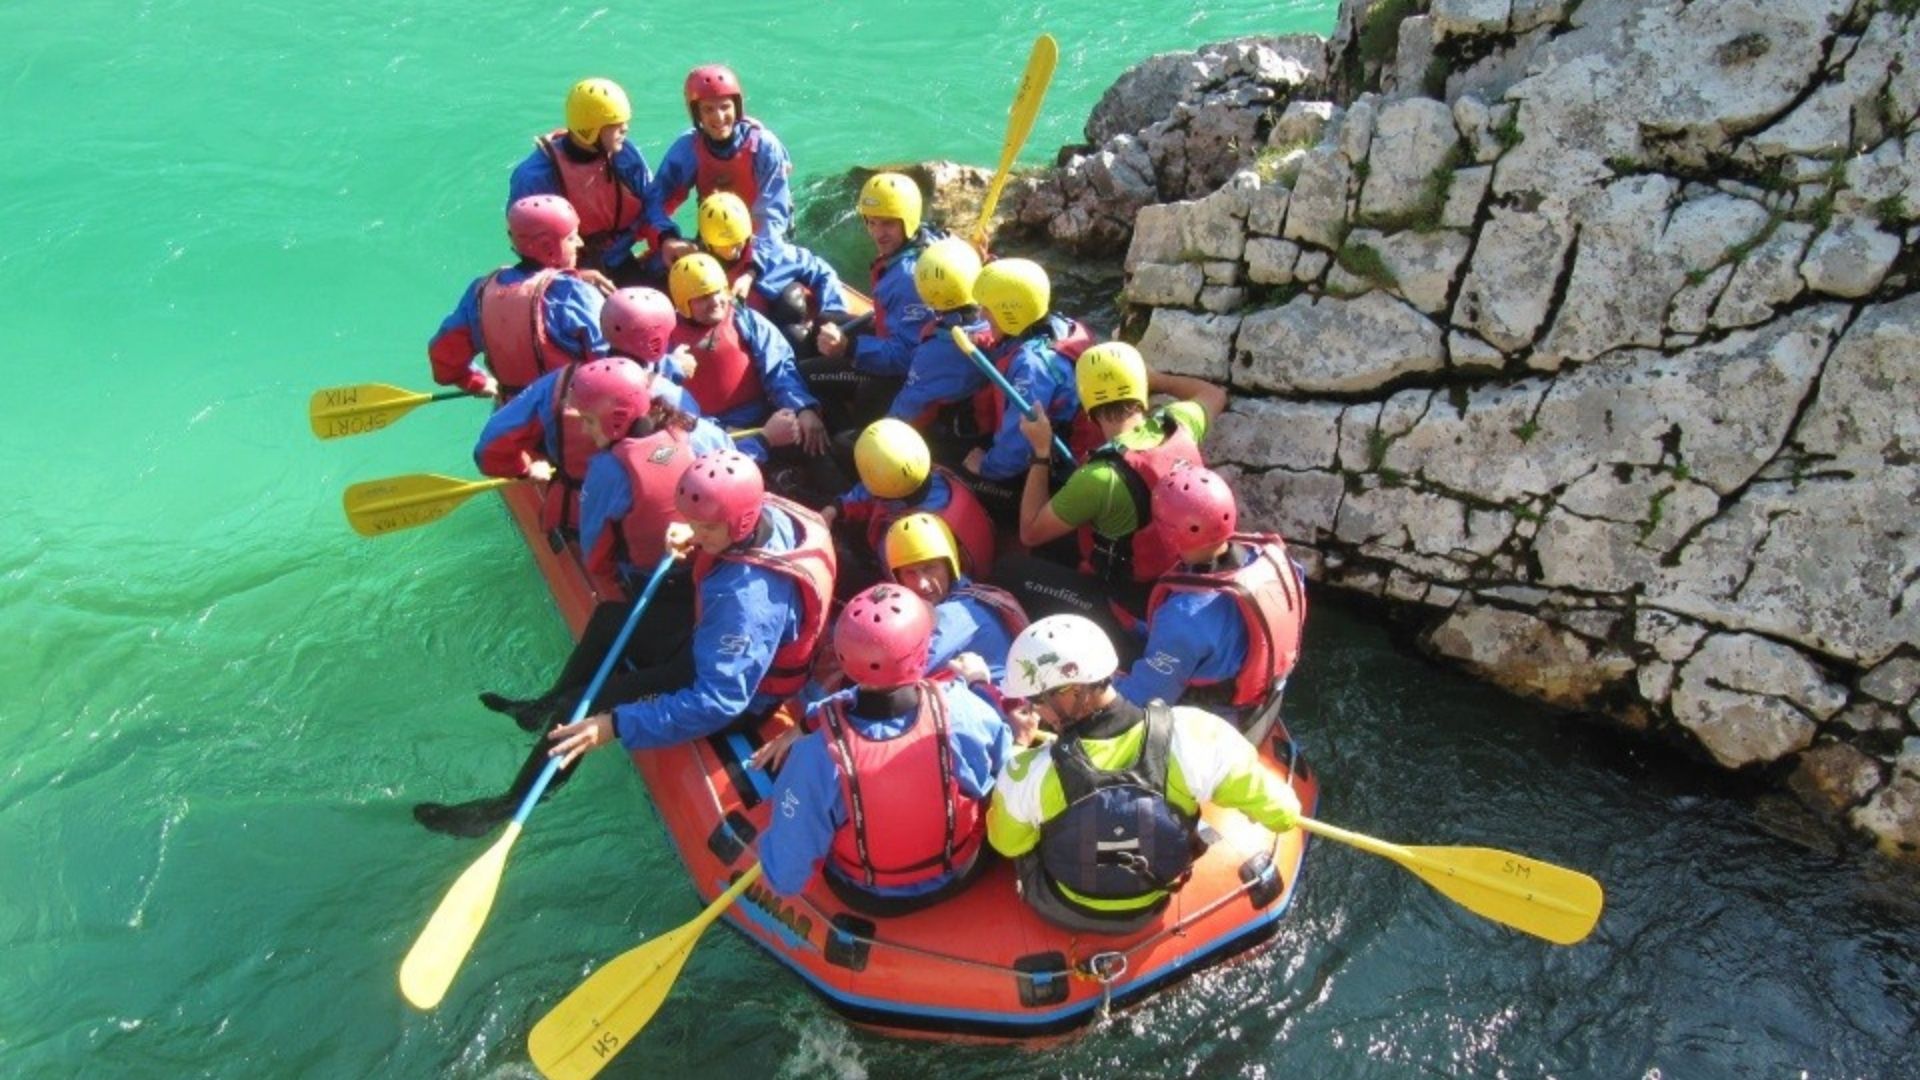 team building participants in a raft